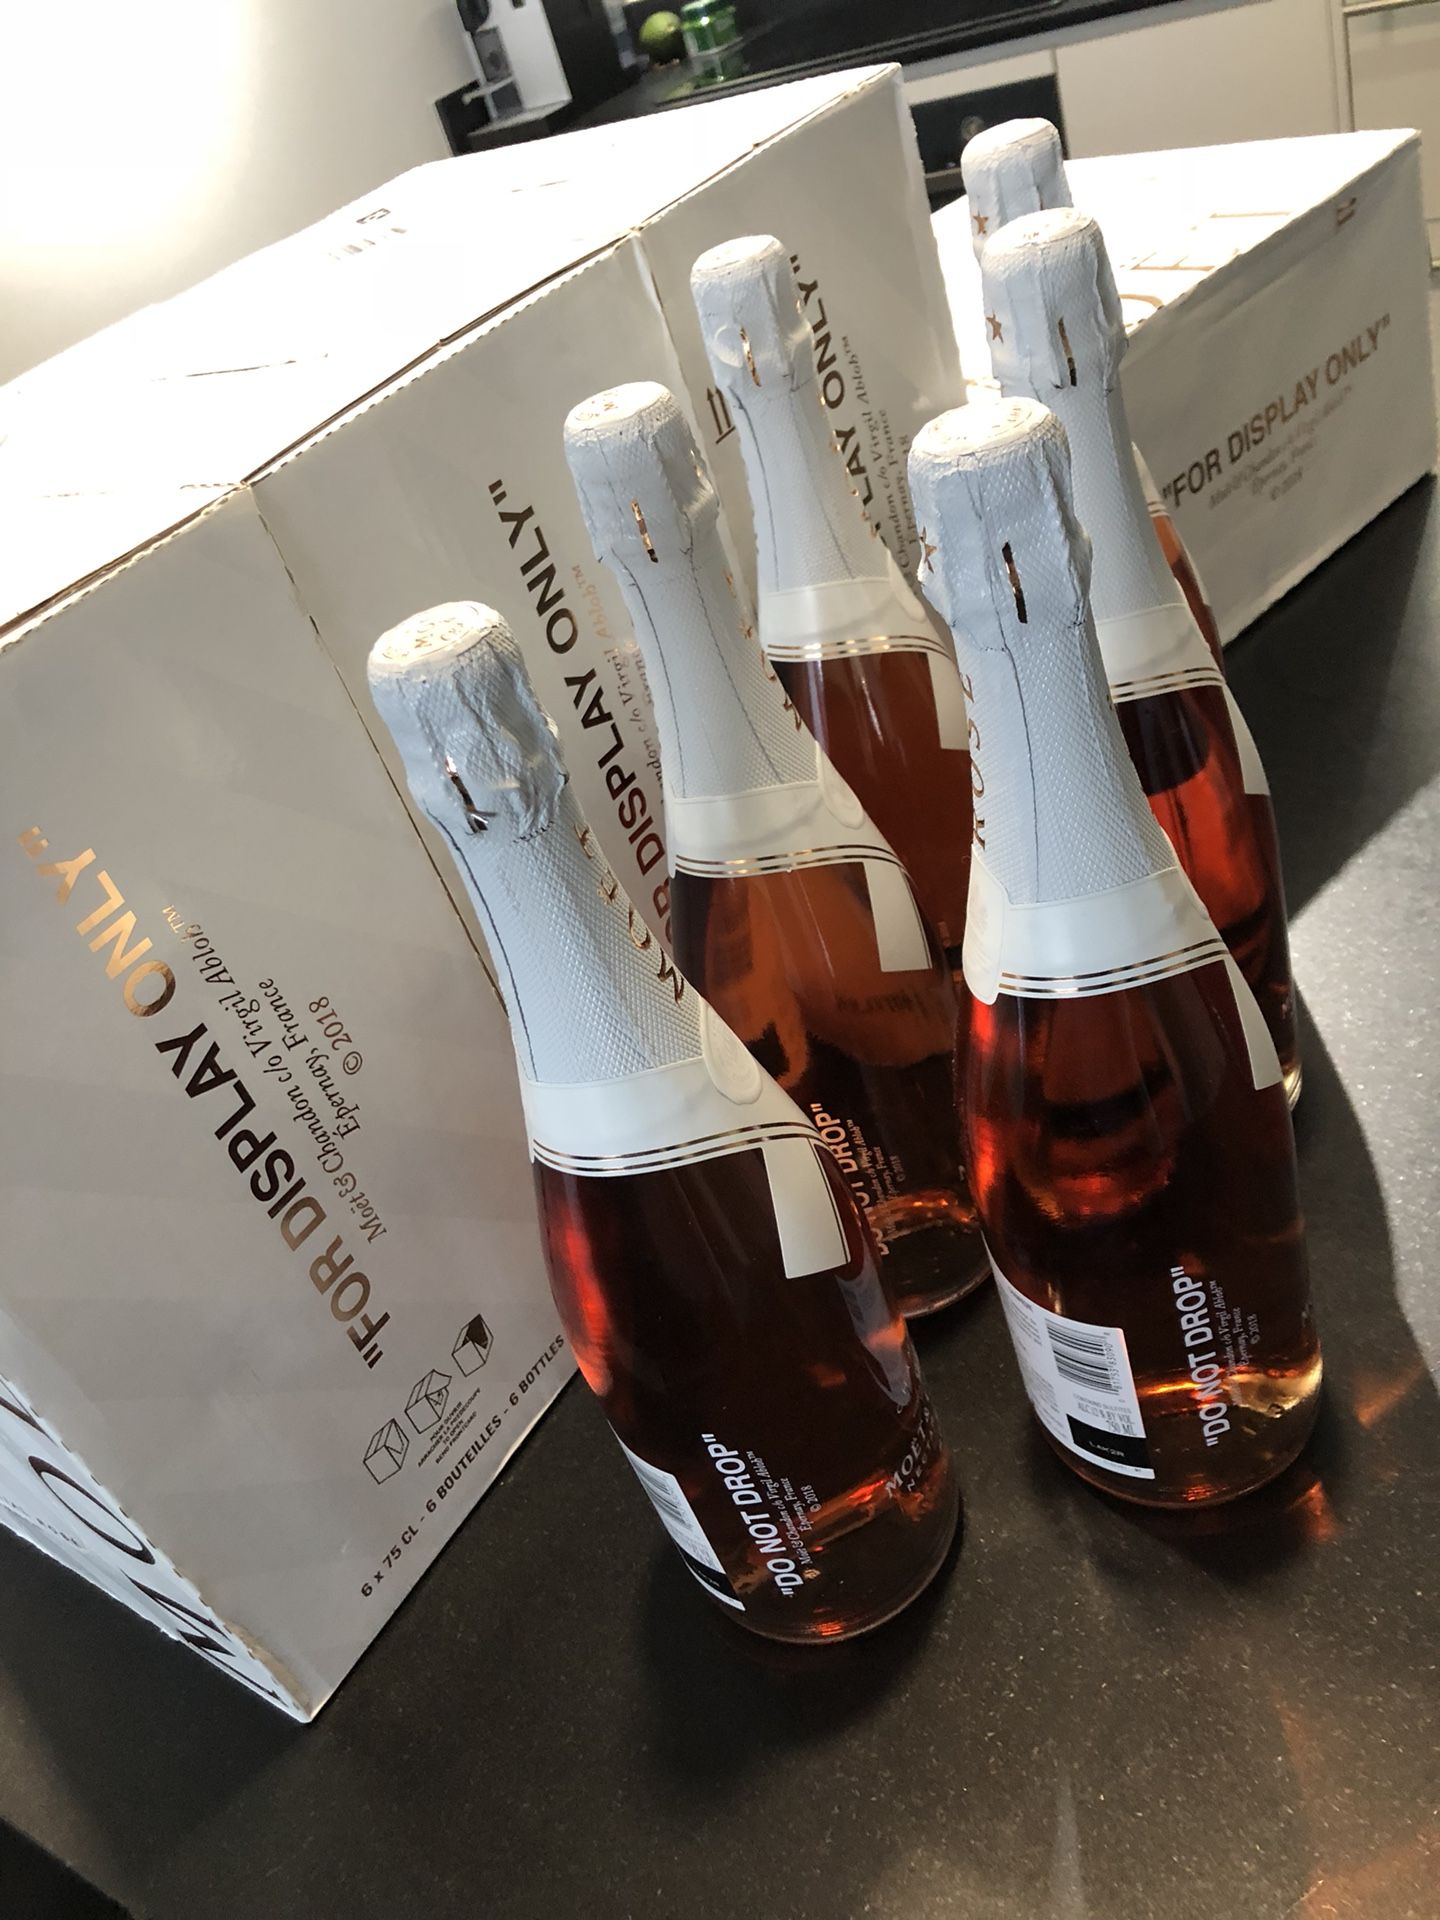 Virgil Abloh | Off-White Moet & Chandon Nectar Imperial Rose Champagne  (2018) | Available for Sale | Artsy